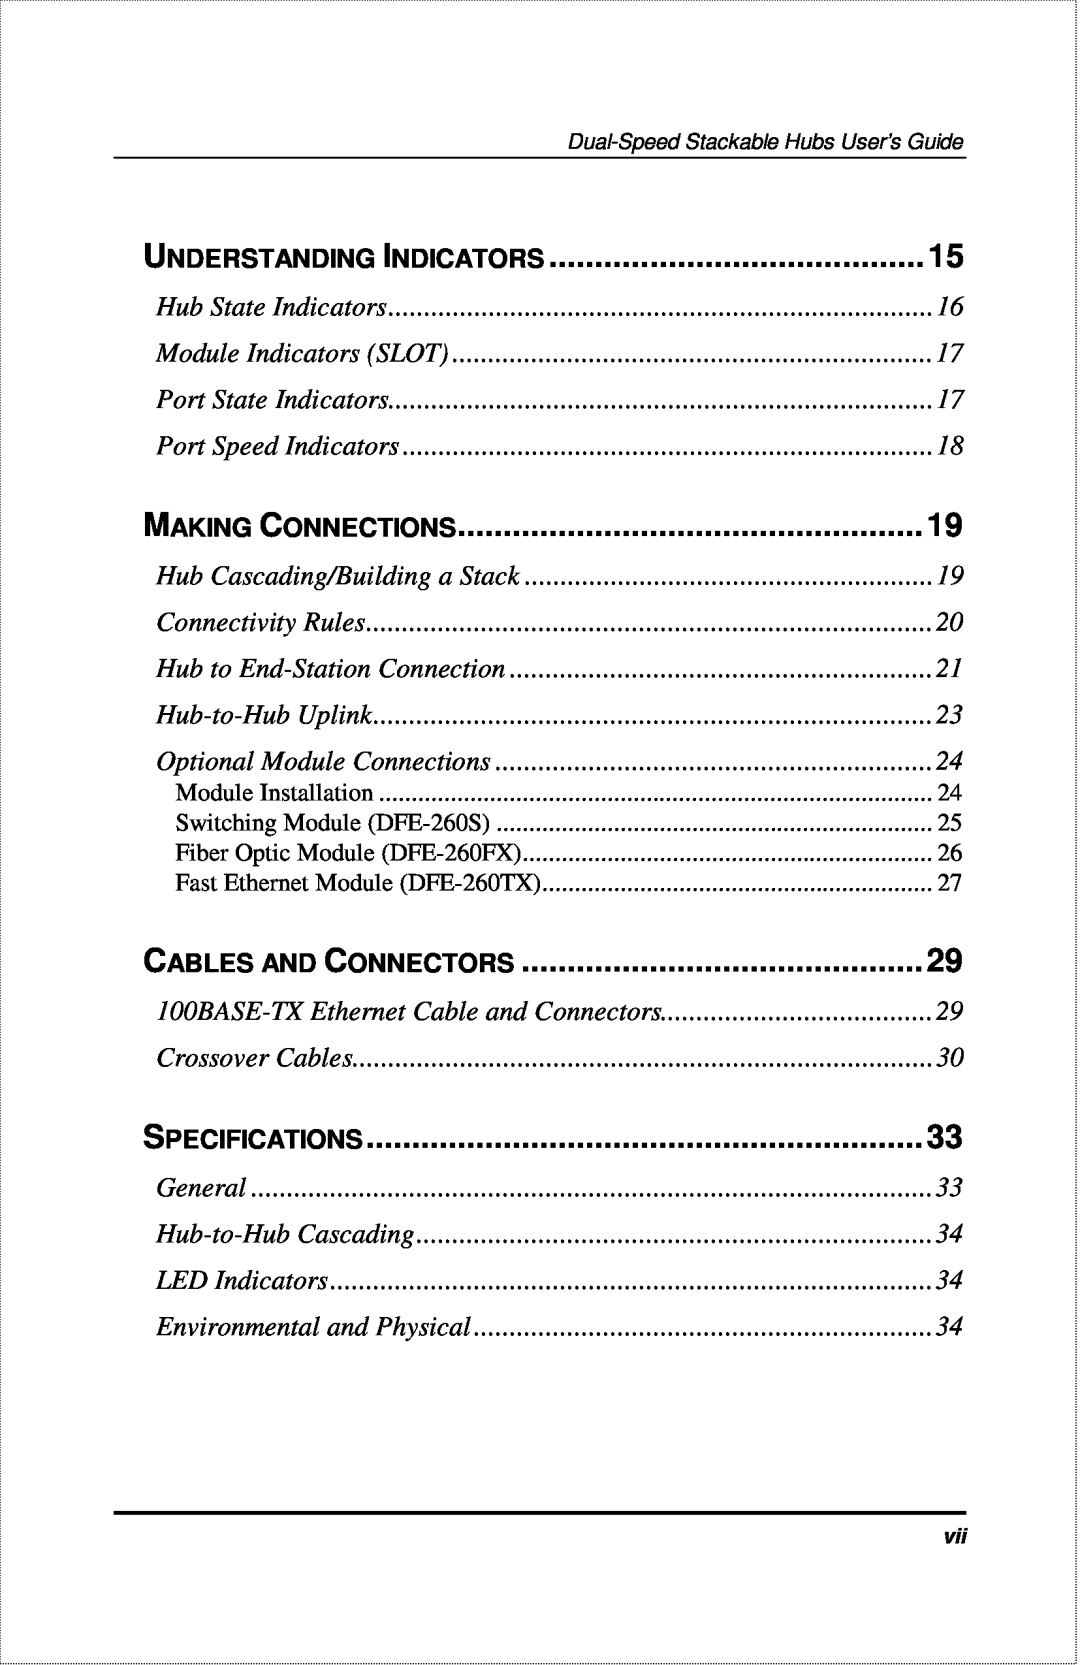 D-Link DFE-916X manual Understanding Indicators, Making Connections, Cables And Connectors, Specifications 